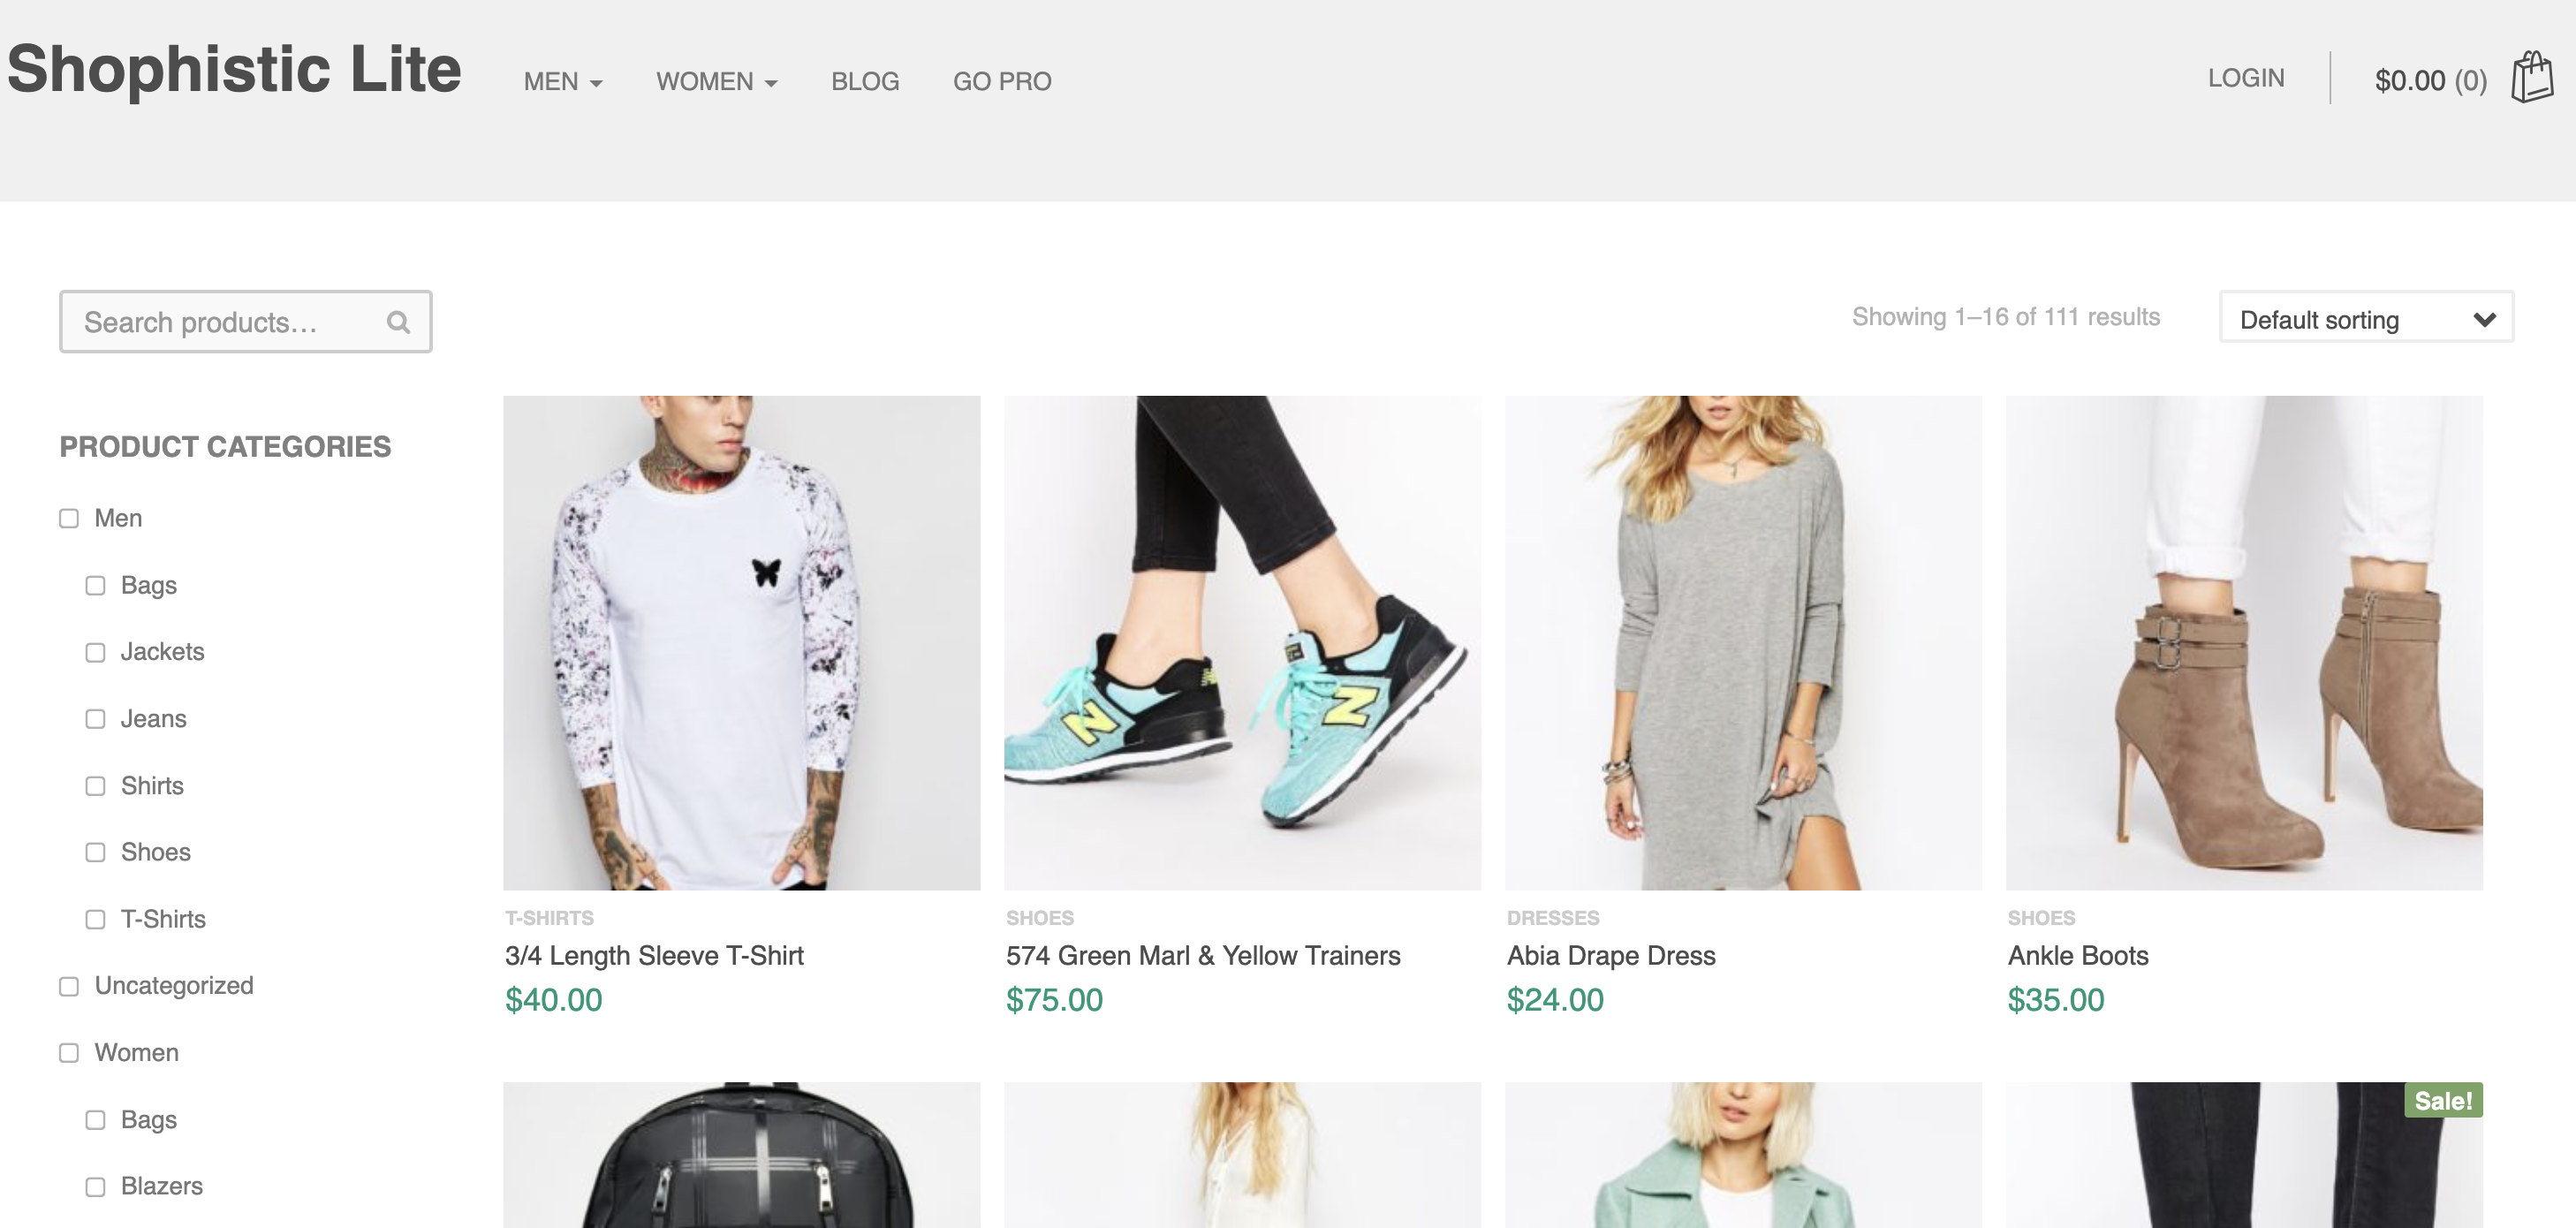  Best website ecommerce templates, example from Shopistic.